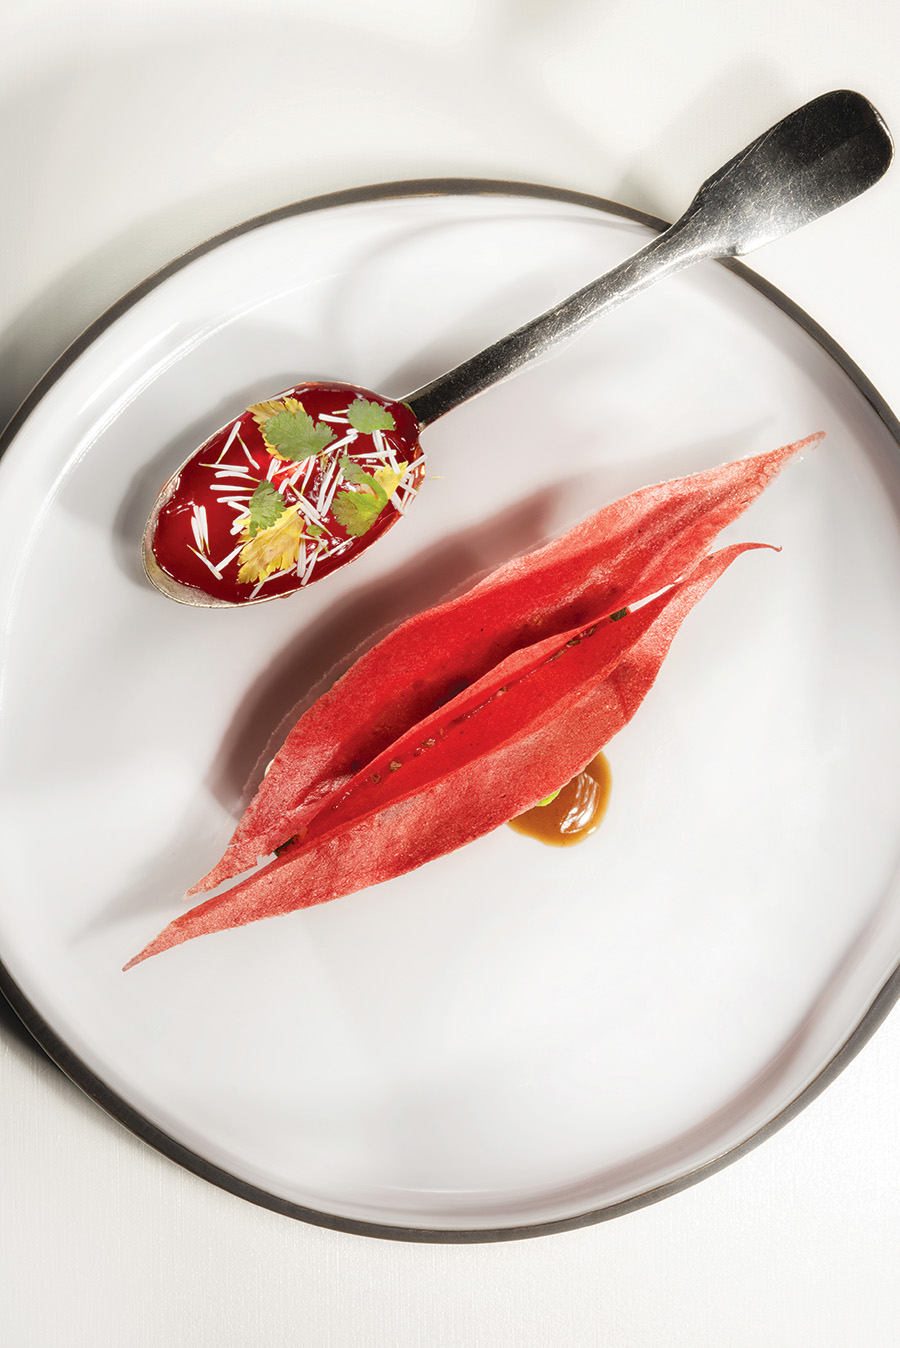 Strawberries by pastry chef Cédric Perret